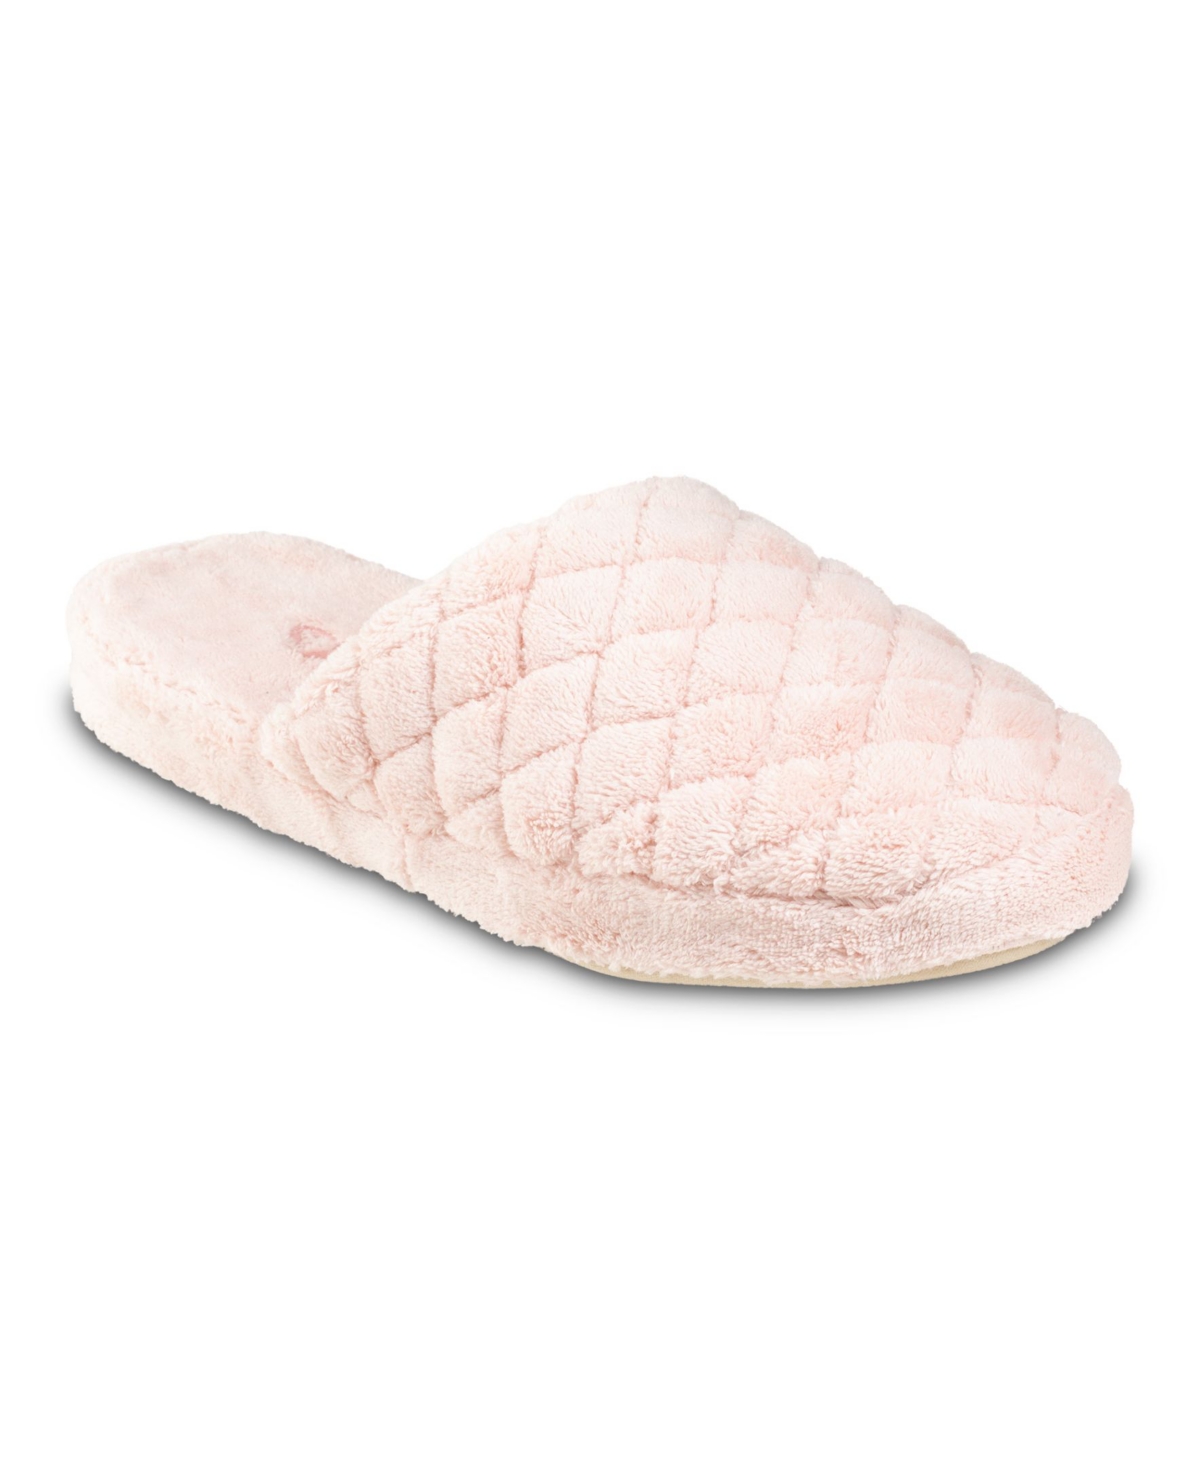 Acorn Women's Spa Quilted Clog Slippers Women's Shoes